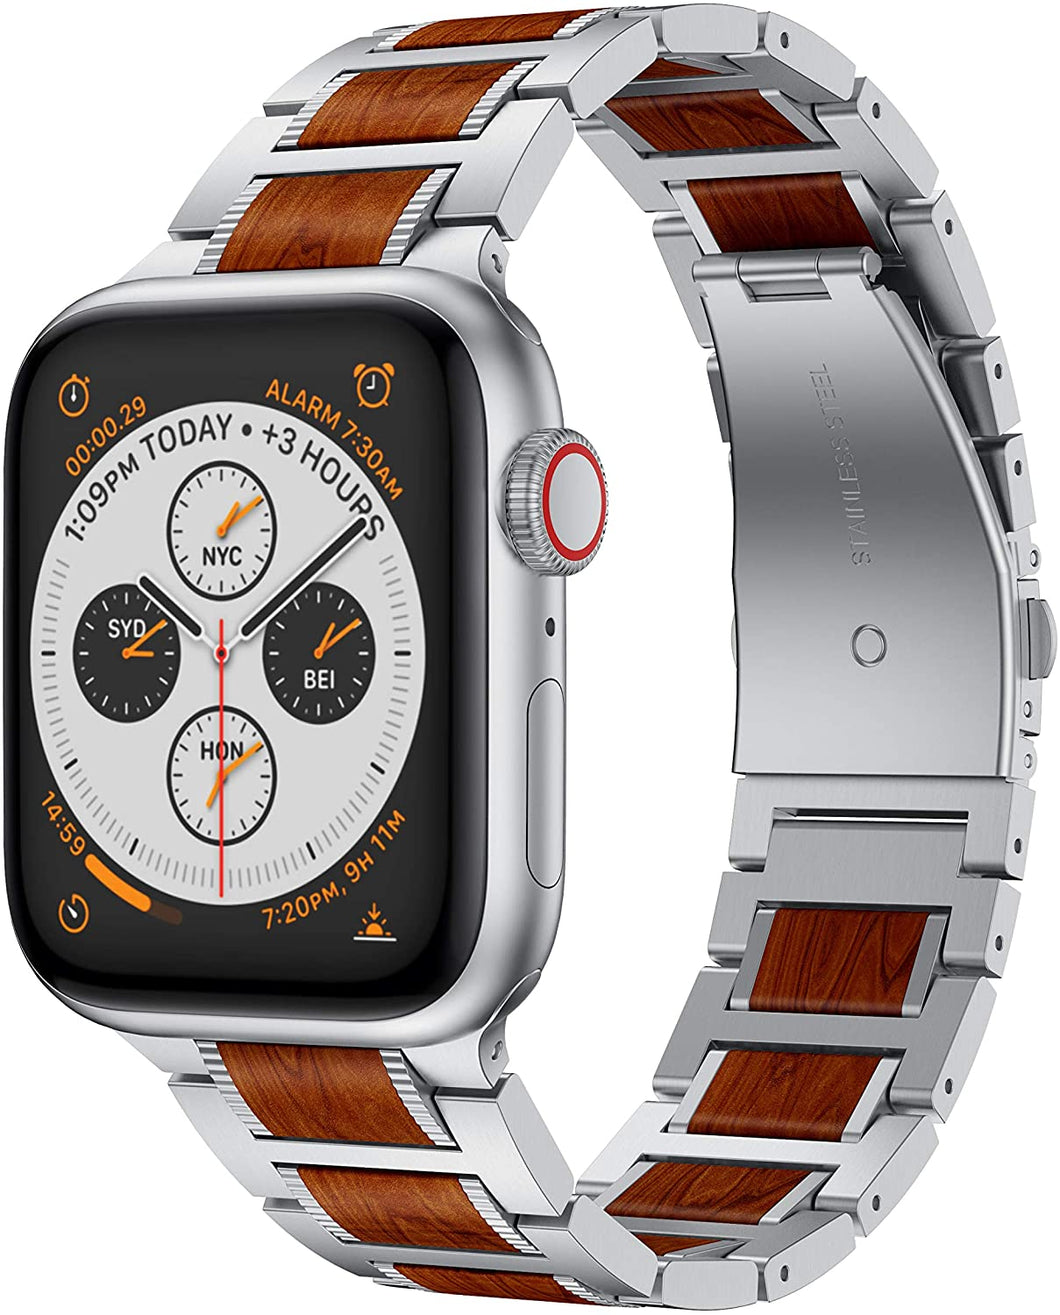 Red Sandalwood Stainless Steel Metal Band for Apple Watch - Strapsz Apple Watch Metal Bands Strapsz 